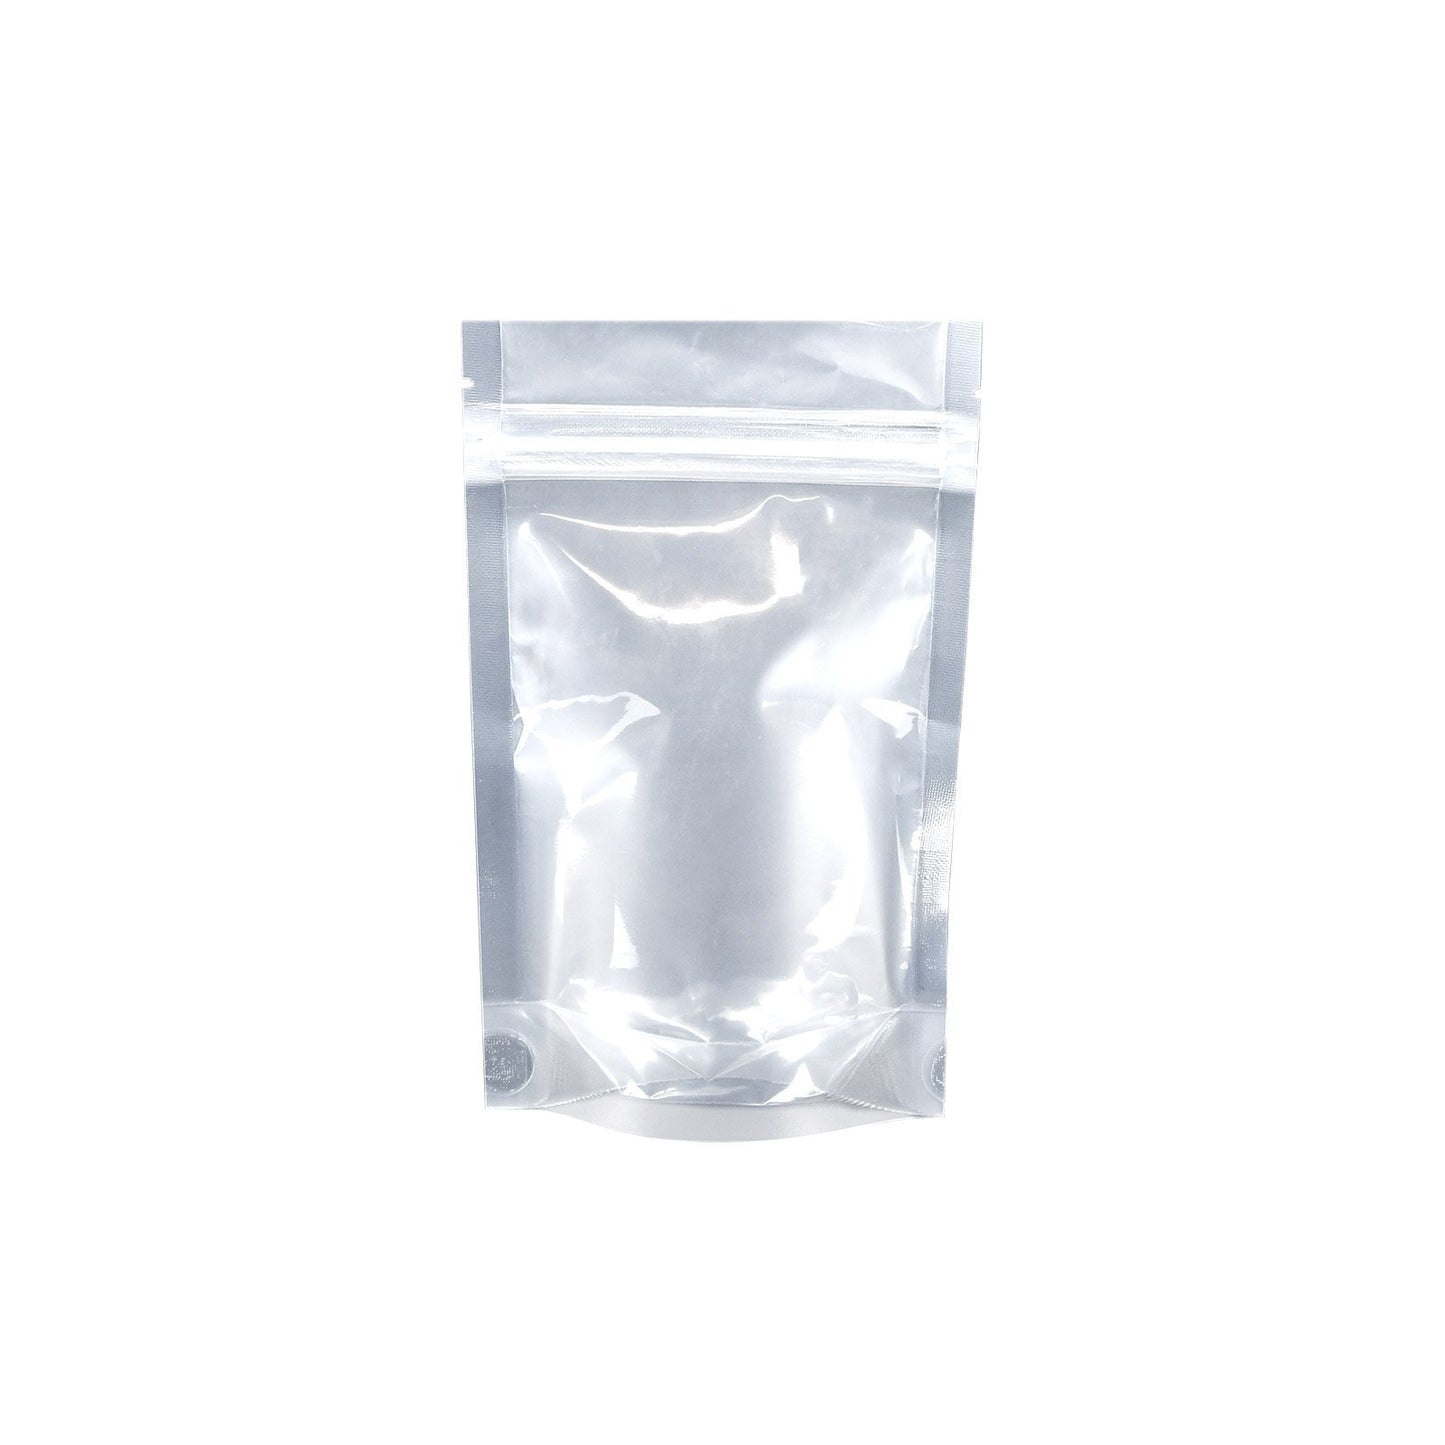 Mylar Bag Tear Notch Clear Black 1/8oz 1000 COUNT at Flower Power Packages